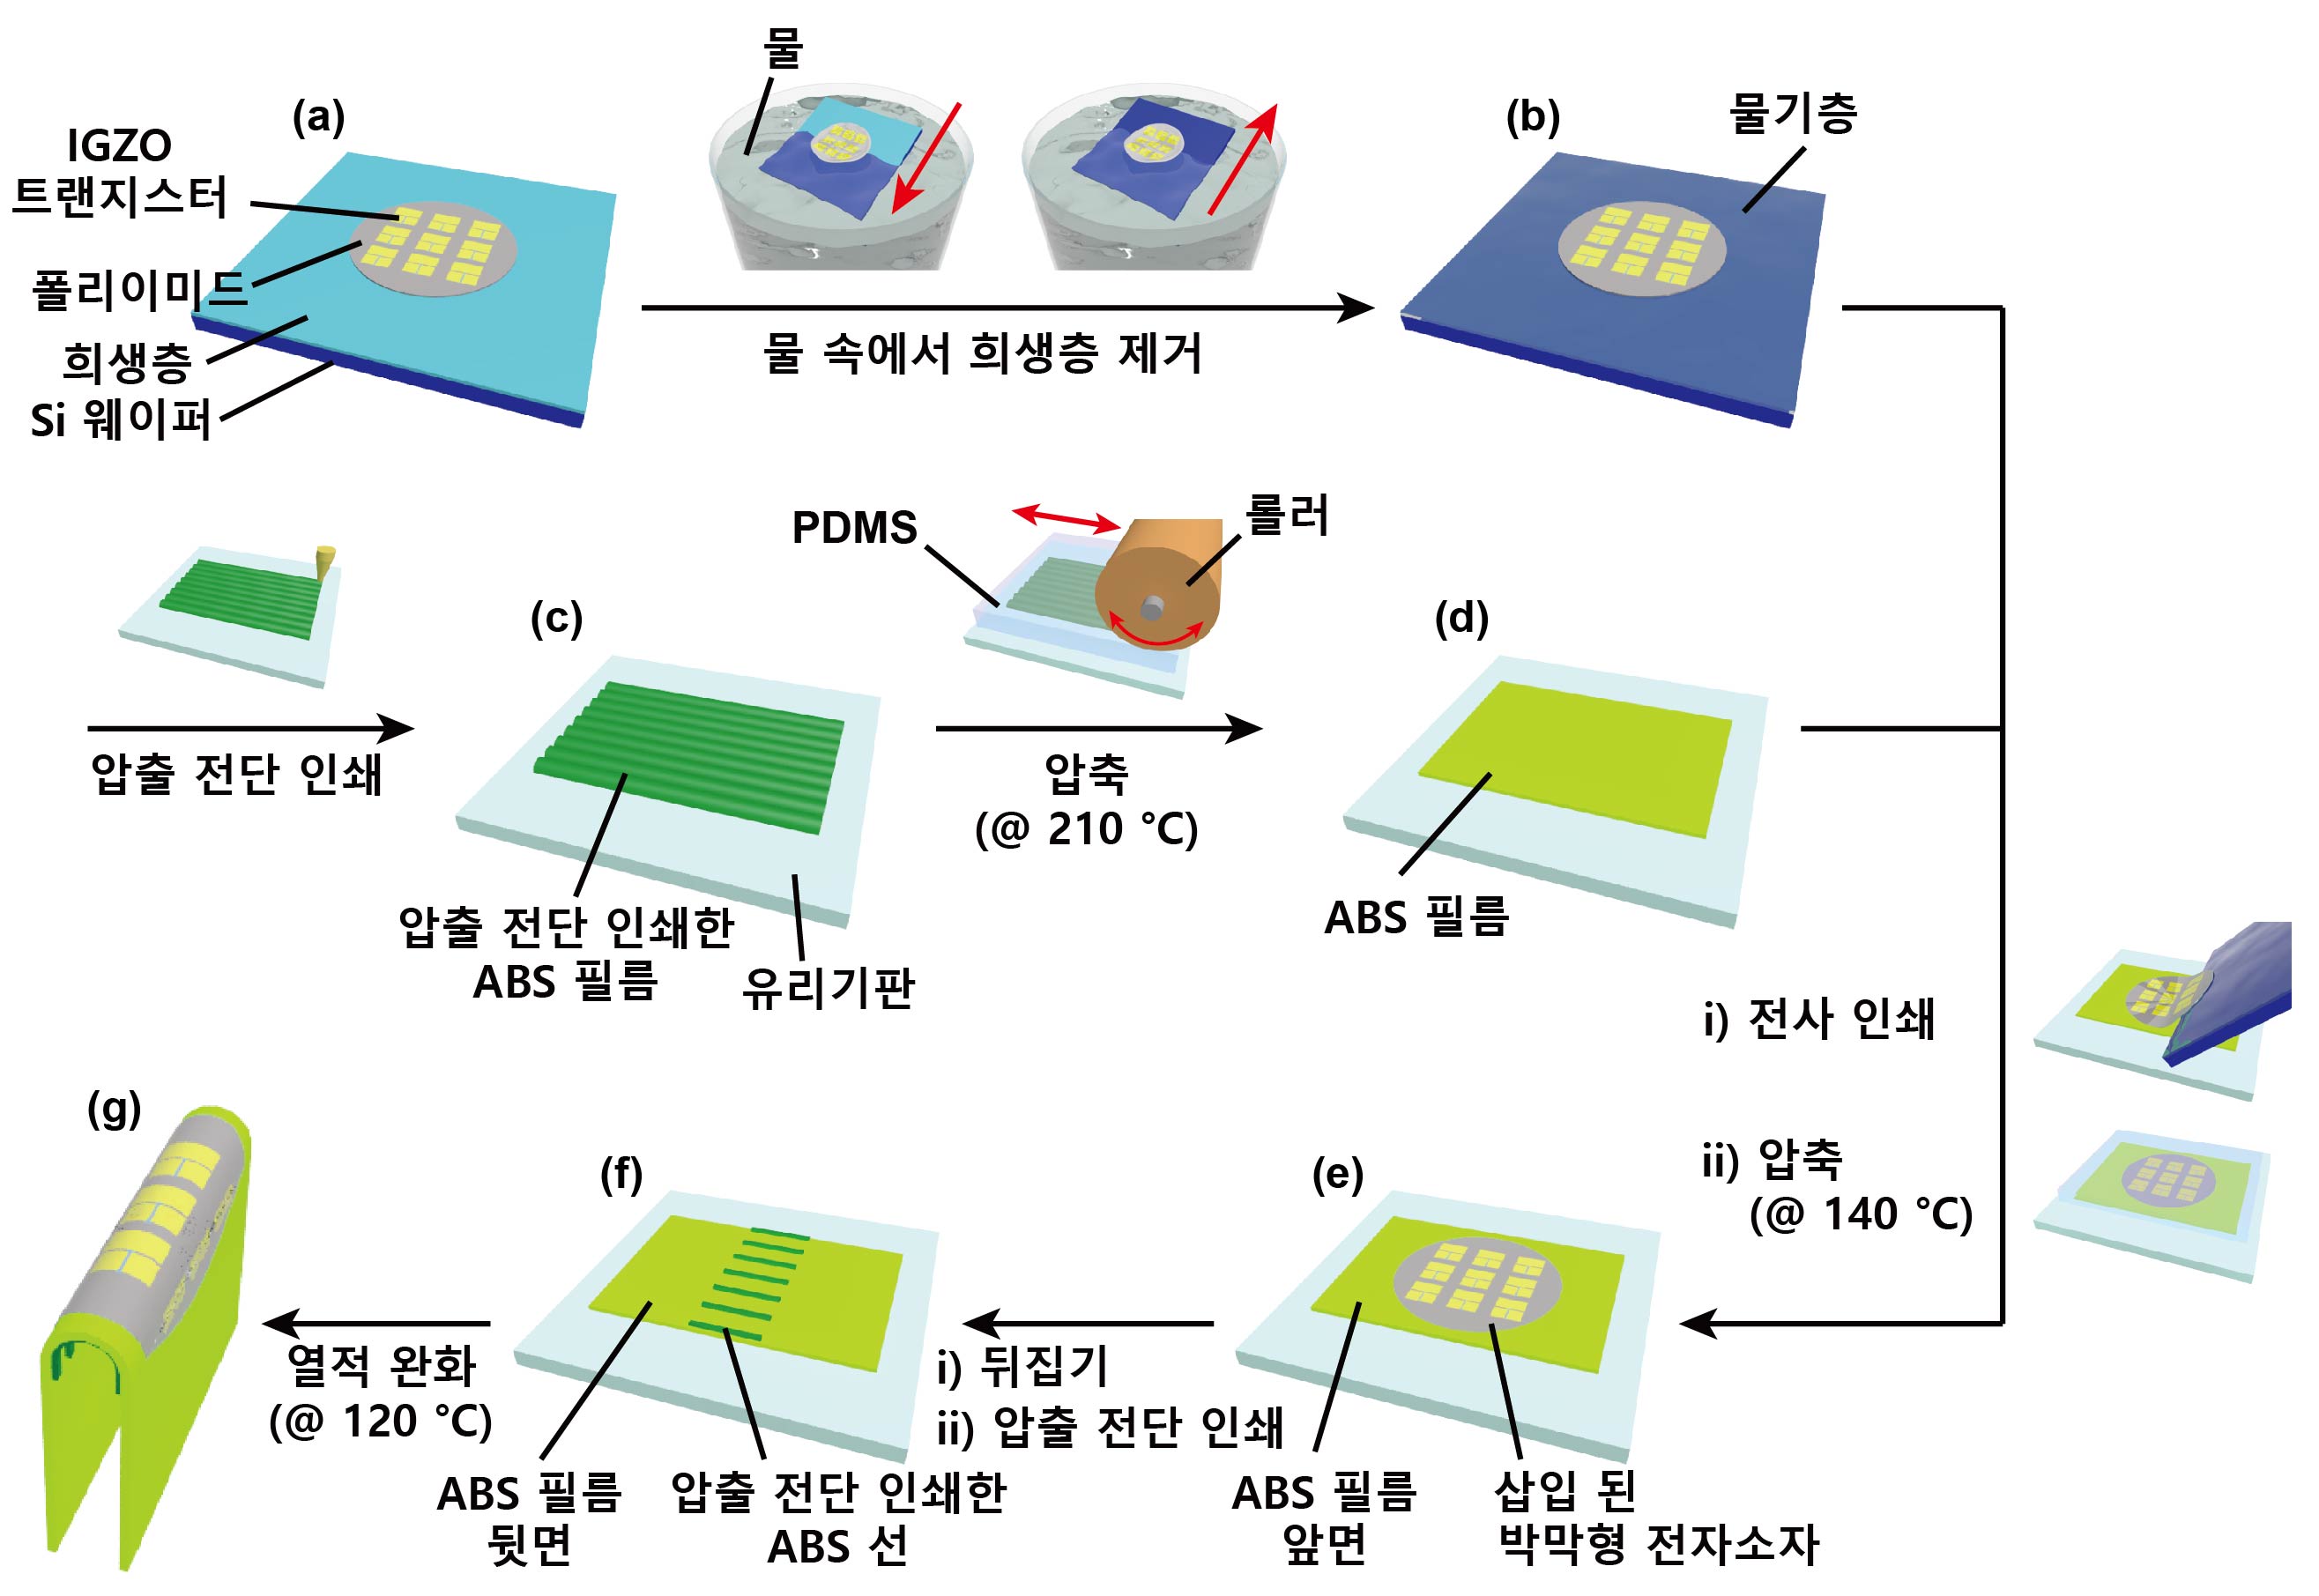 Professor Heung Cho Ko's research team develops an electronic device that can be automatically transformed into a 3D form (National Research Foundation of Korea) 이미지